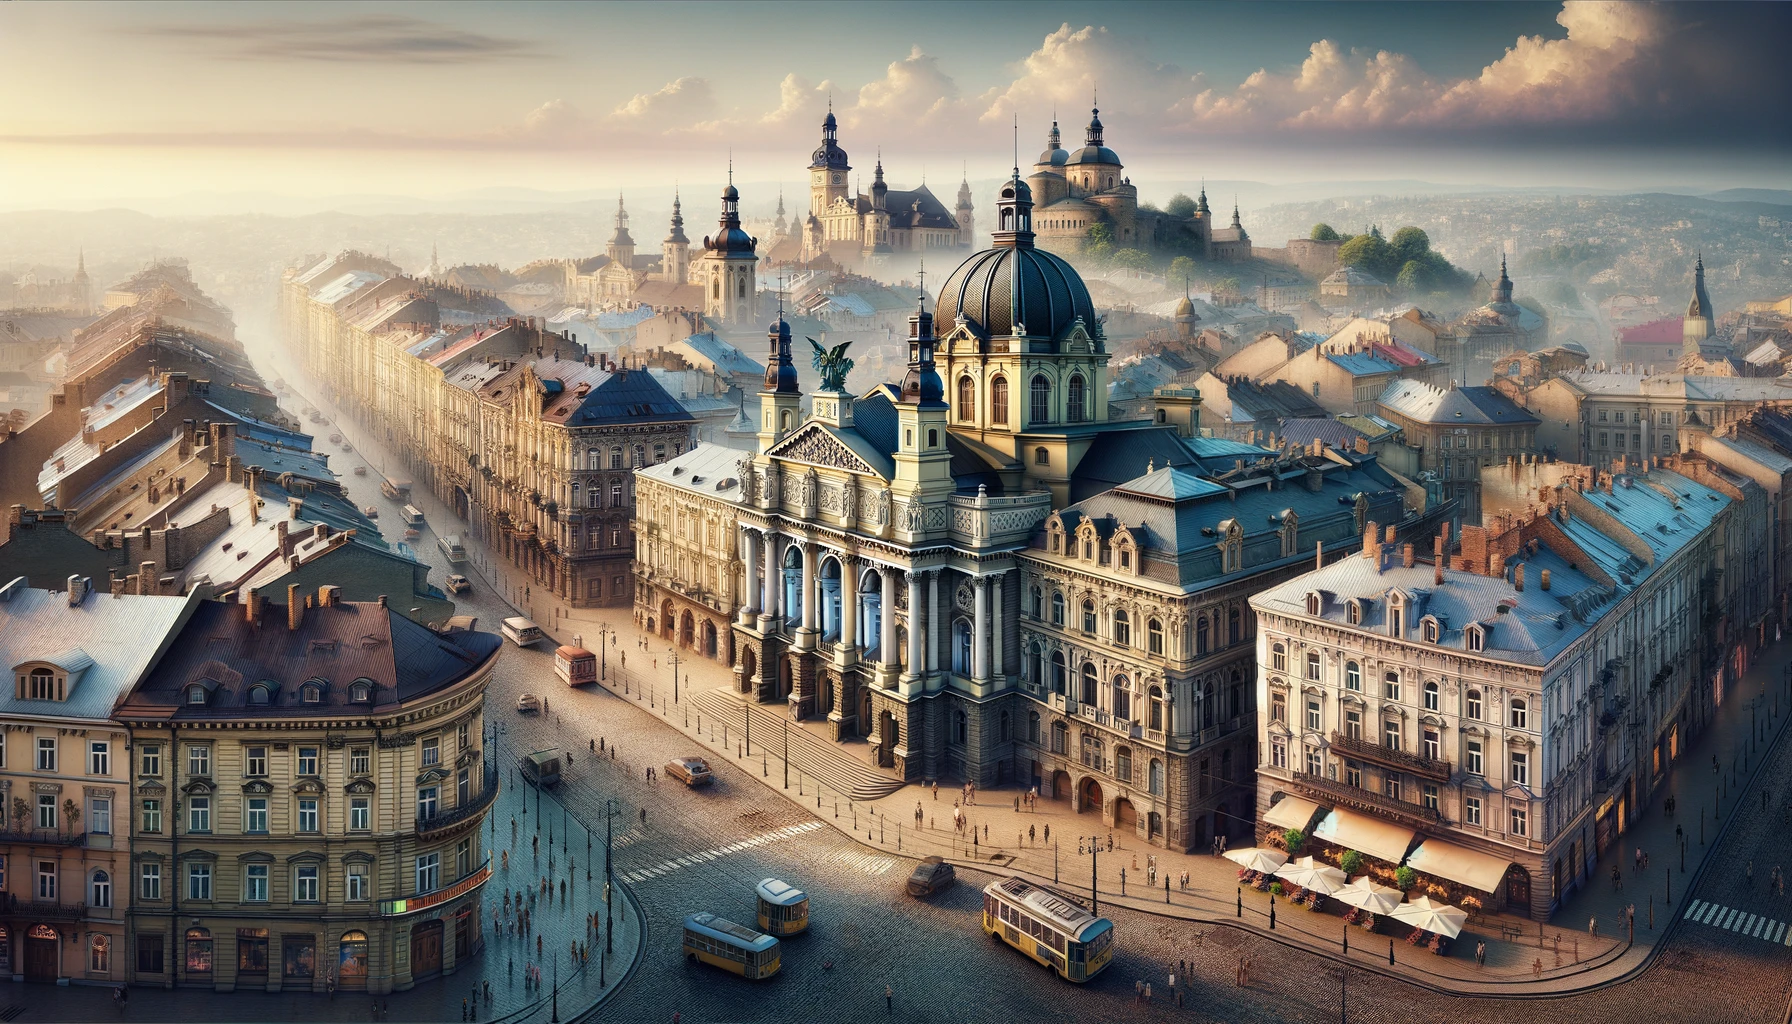 <p>Lviv is a hidden gem in Western Ukraine, known for its beautiful architecture and vibrant cultural scene. The cost of living is incredibly low, and the city offers a peaceful yet stimulating environment with its cafes, museums, and galleries.</p>